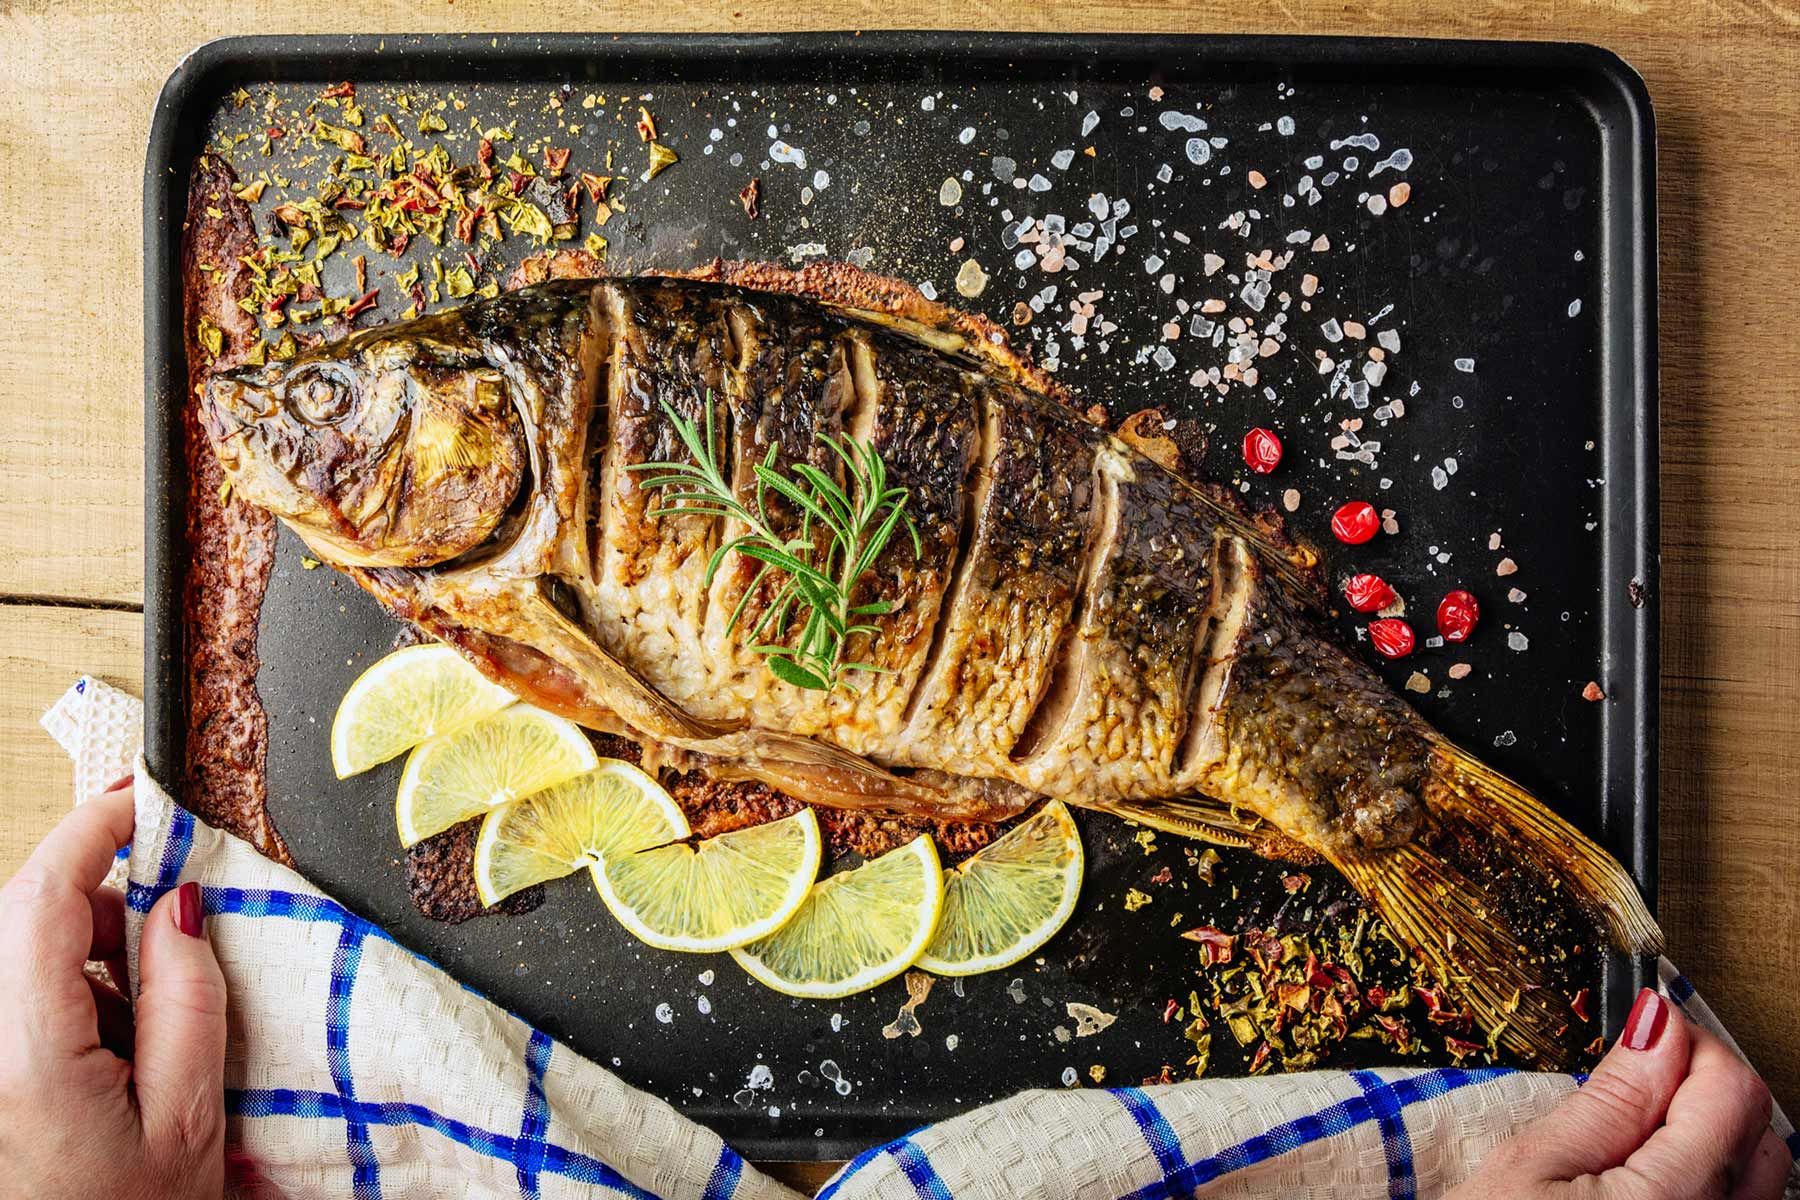 Best and Worst Fish for Your Health